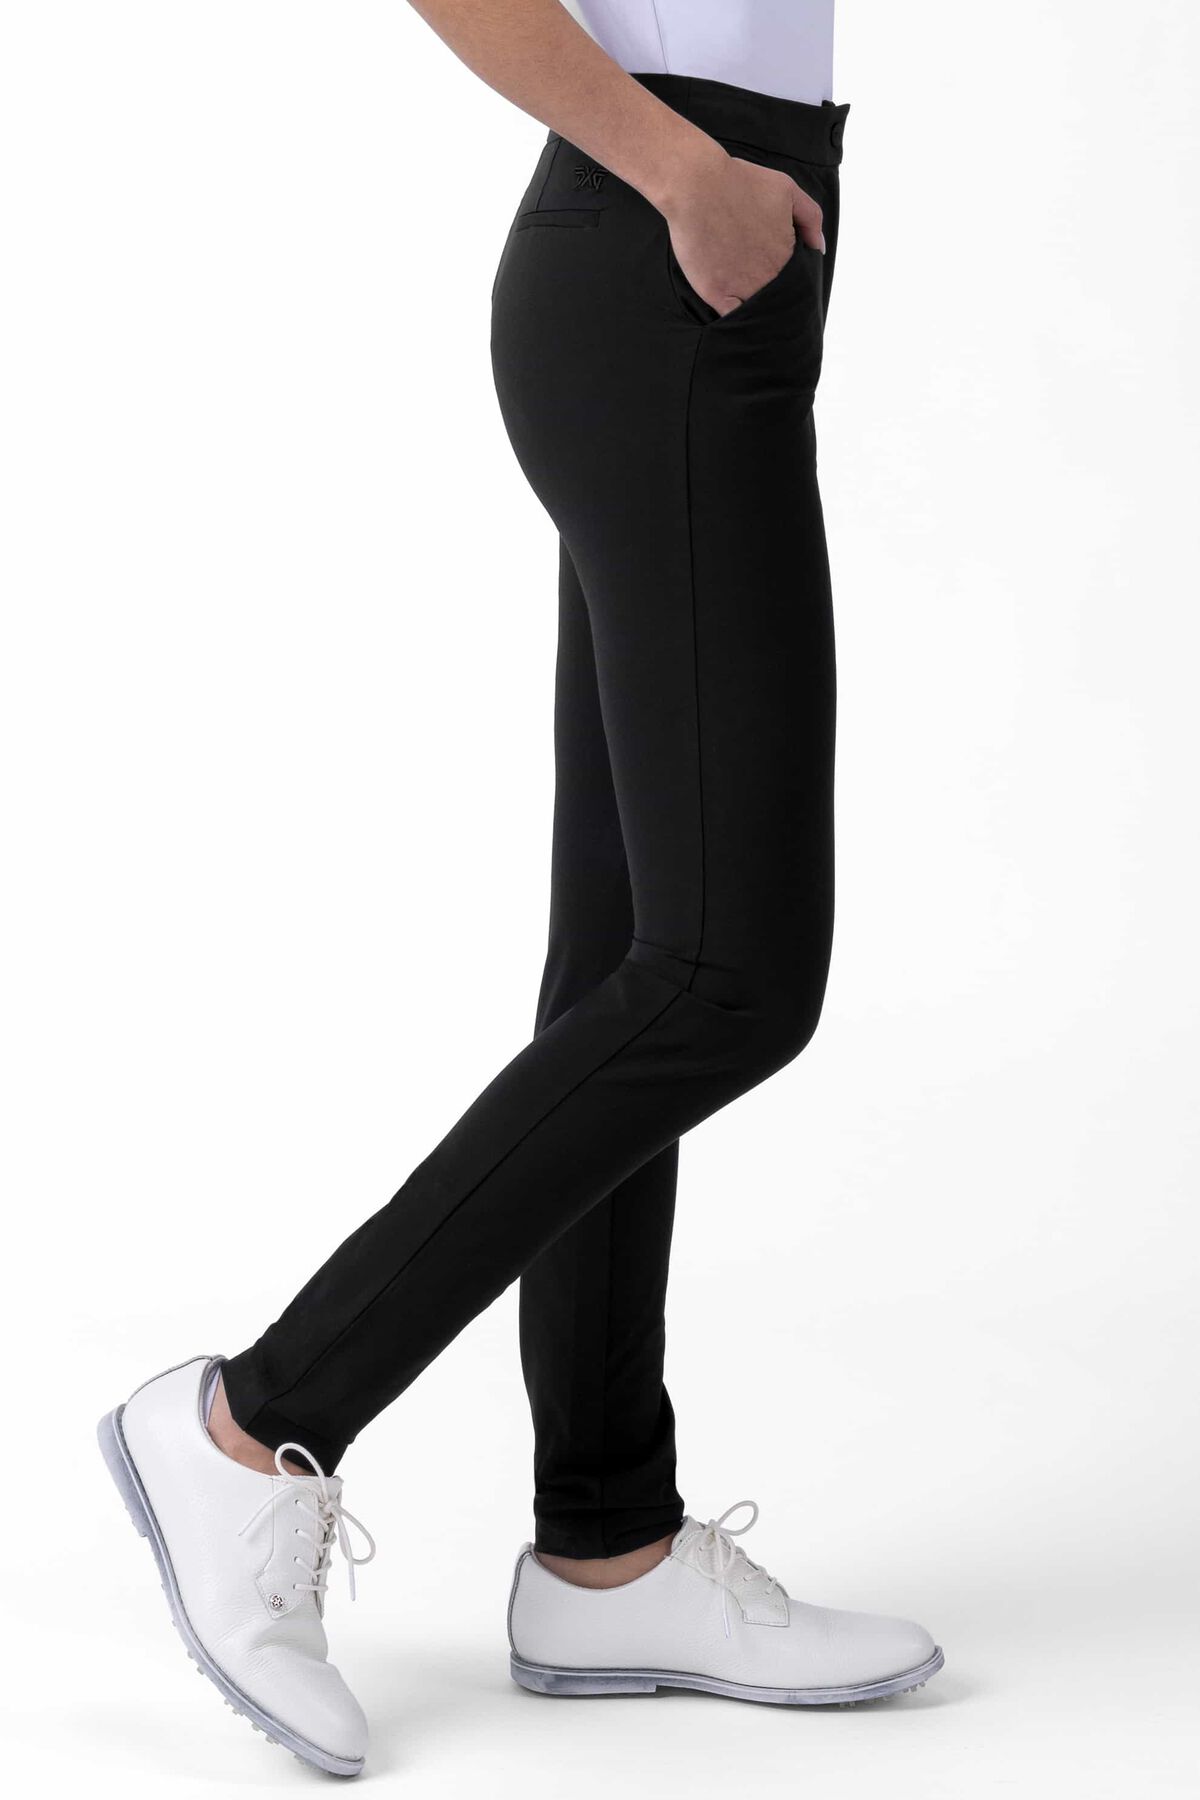 Womens Stretch Pull On Pant  Golf pants, Pants for women, Womens